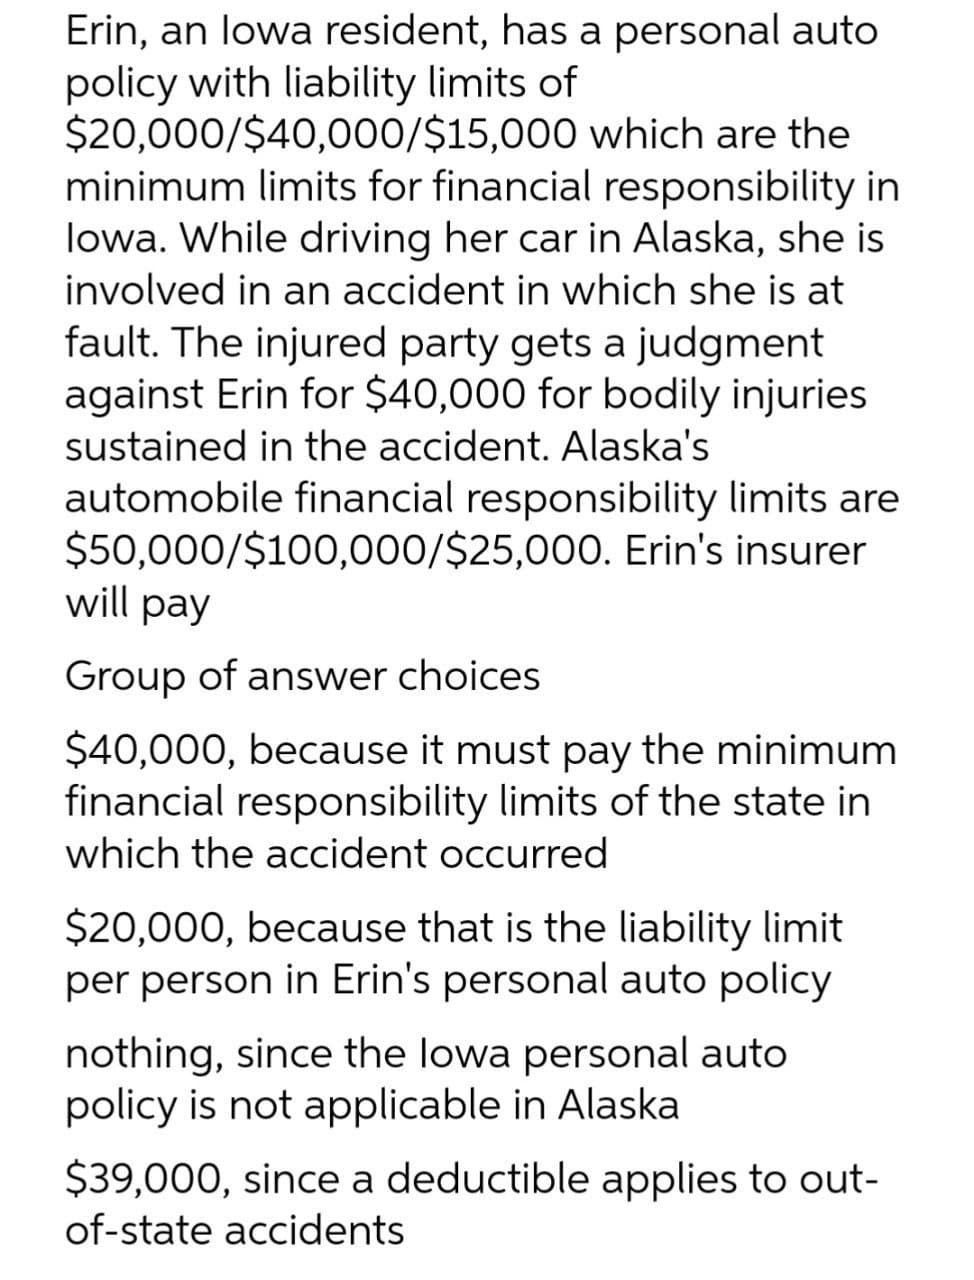 Erin, an lowa resident, has a personal auto
policy with liability limits of
$20,000/$40,000/$15,000 which are the
minimum limits for financial responsibility in
lowa. While driving her car in Alaska, she is
involved in an accident in which she is at
fault. The injured party gets a judgment
against Erin for $40,000 for bodily injuries
sustained in the accident. Alaska's
automobile financial responsibility limits are
$50,000/$100,000/$25,000. Erin's insurer
will pay
Group of answer choices
$40,000, because it must pay the minimum
financial responsibility limits of the state in
which the accident occurred
$20,000, because that is the liability limit
per person in Erin's personal auto policy
nothing, since the lowa personal auto
policy is not applicable in Alaska
$39,000, since a deductible applies to out-
of-state accidents
